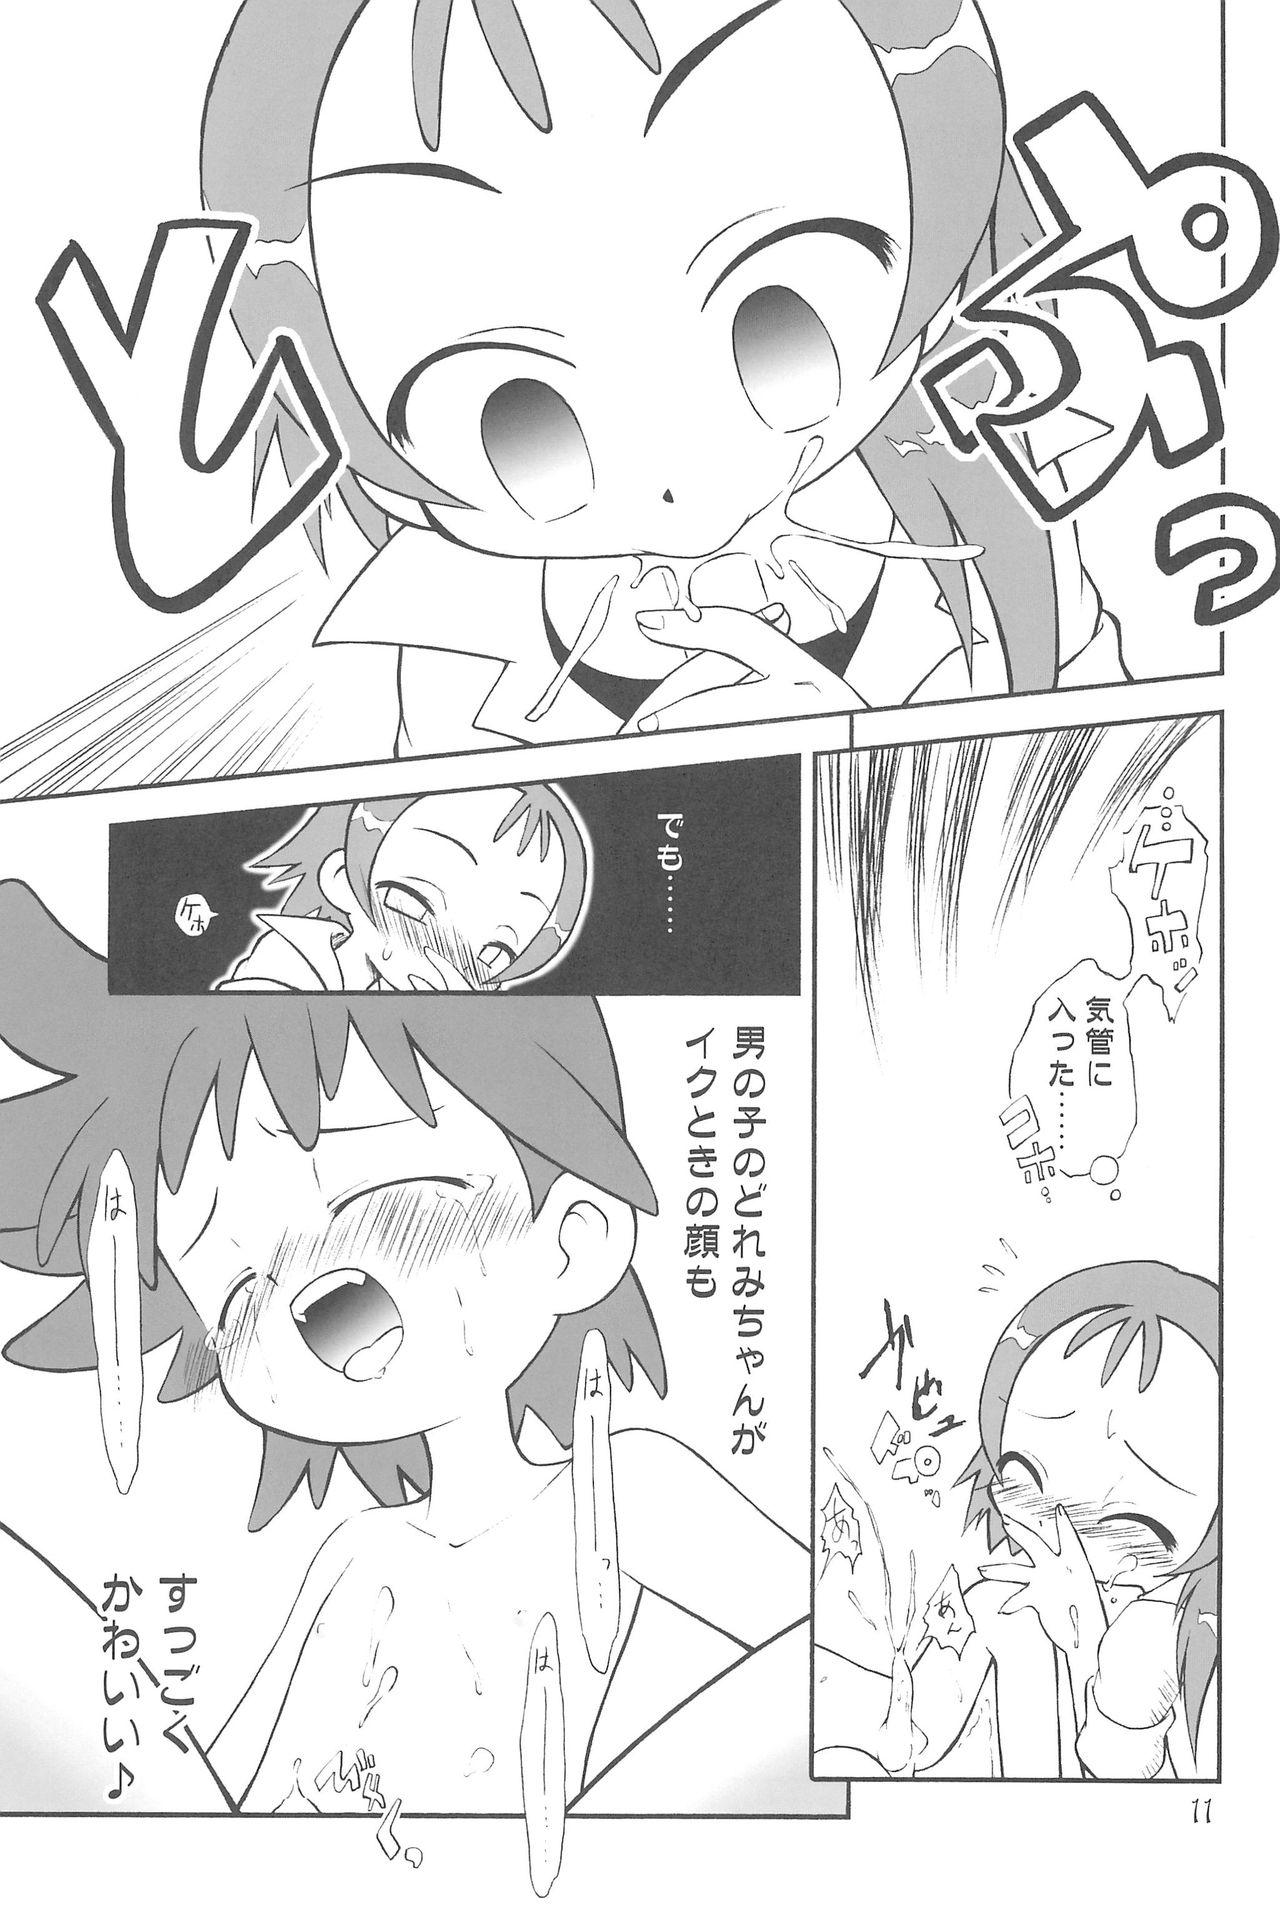 Peluda Witch’s Song Plus - Ojamajo doremi Jap - Page 11